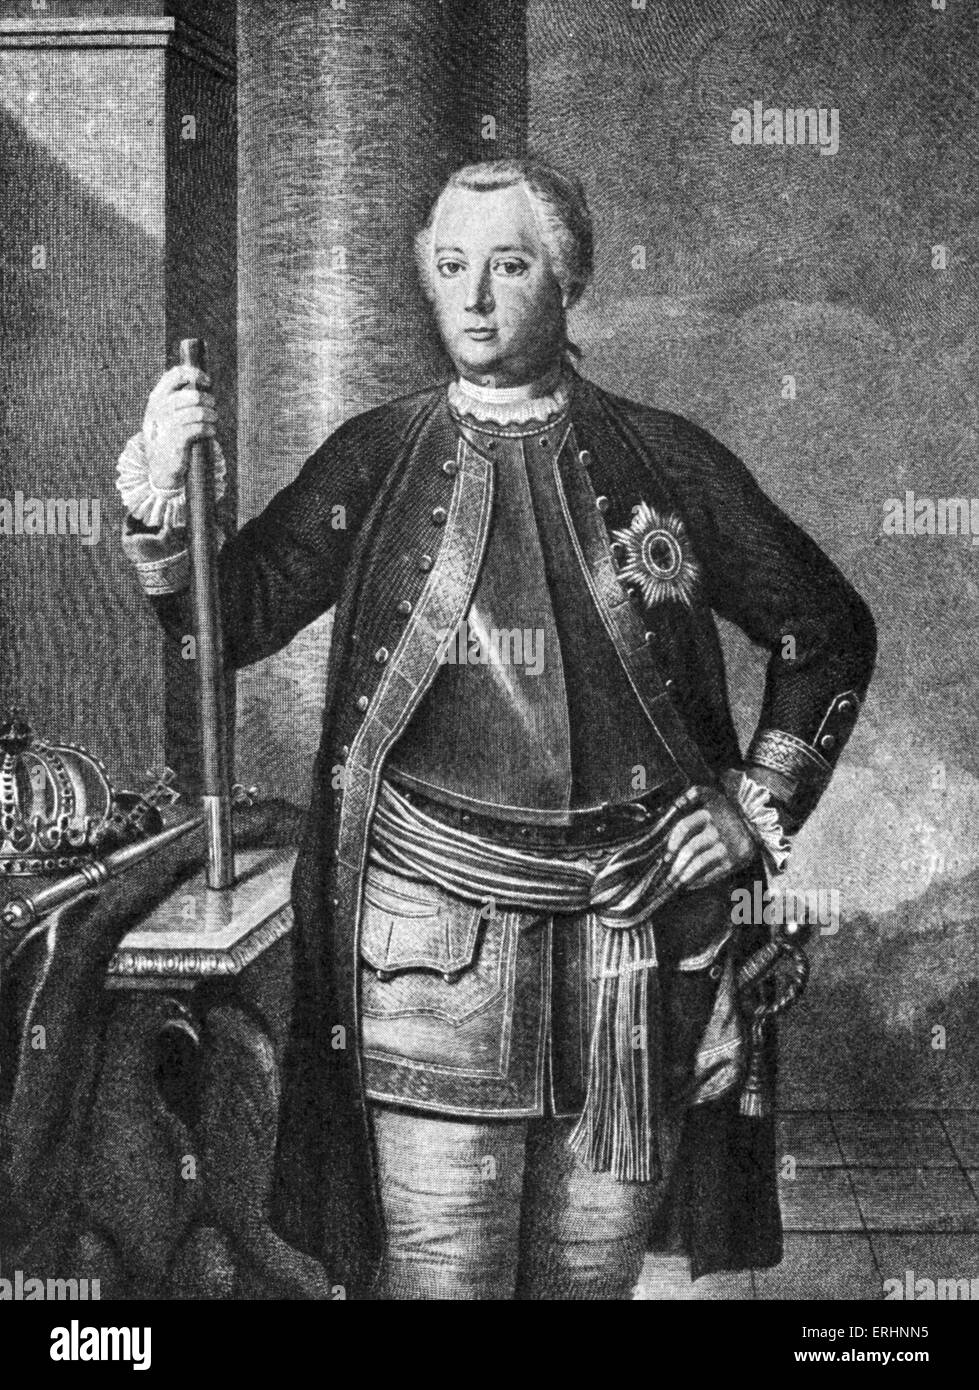 king frederick william iv of prussia